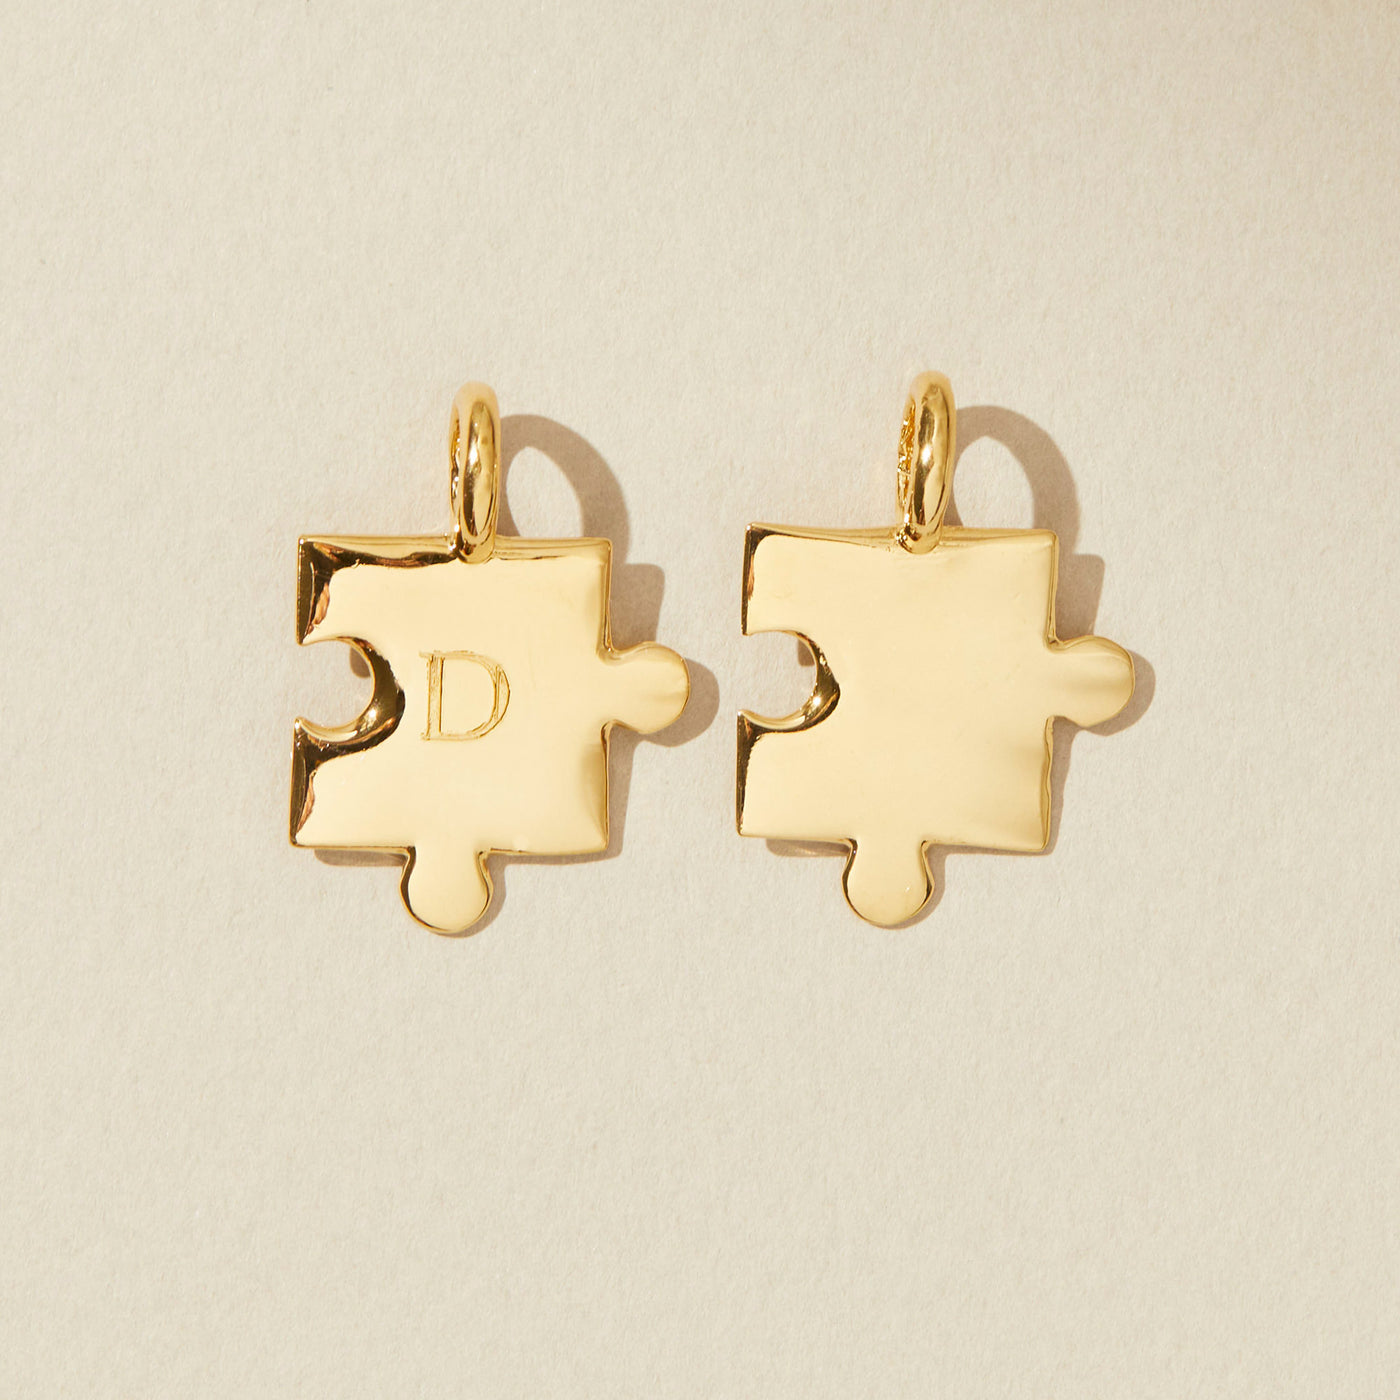 Puzzle piece charms that connect